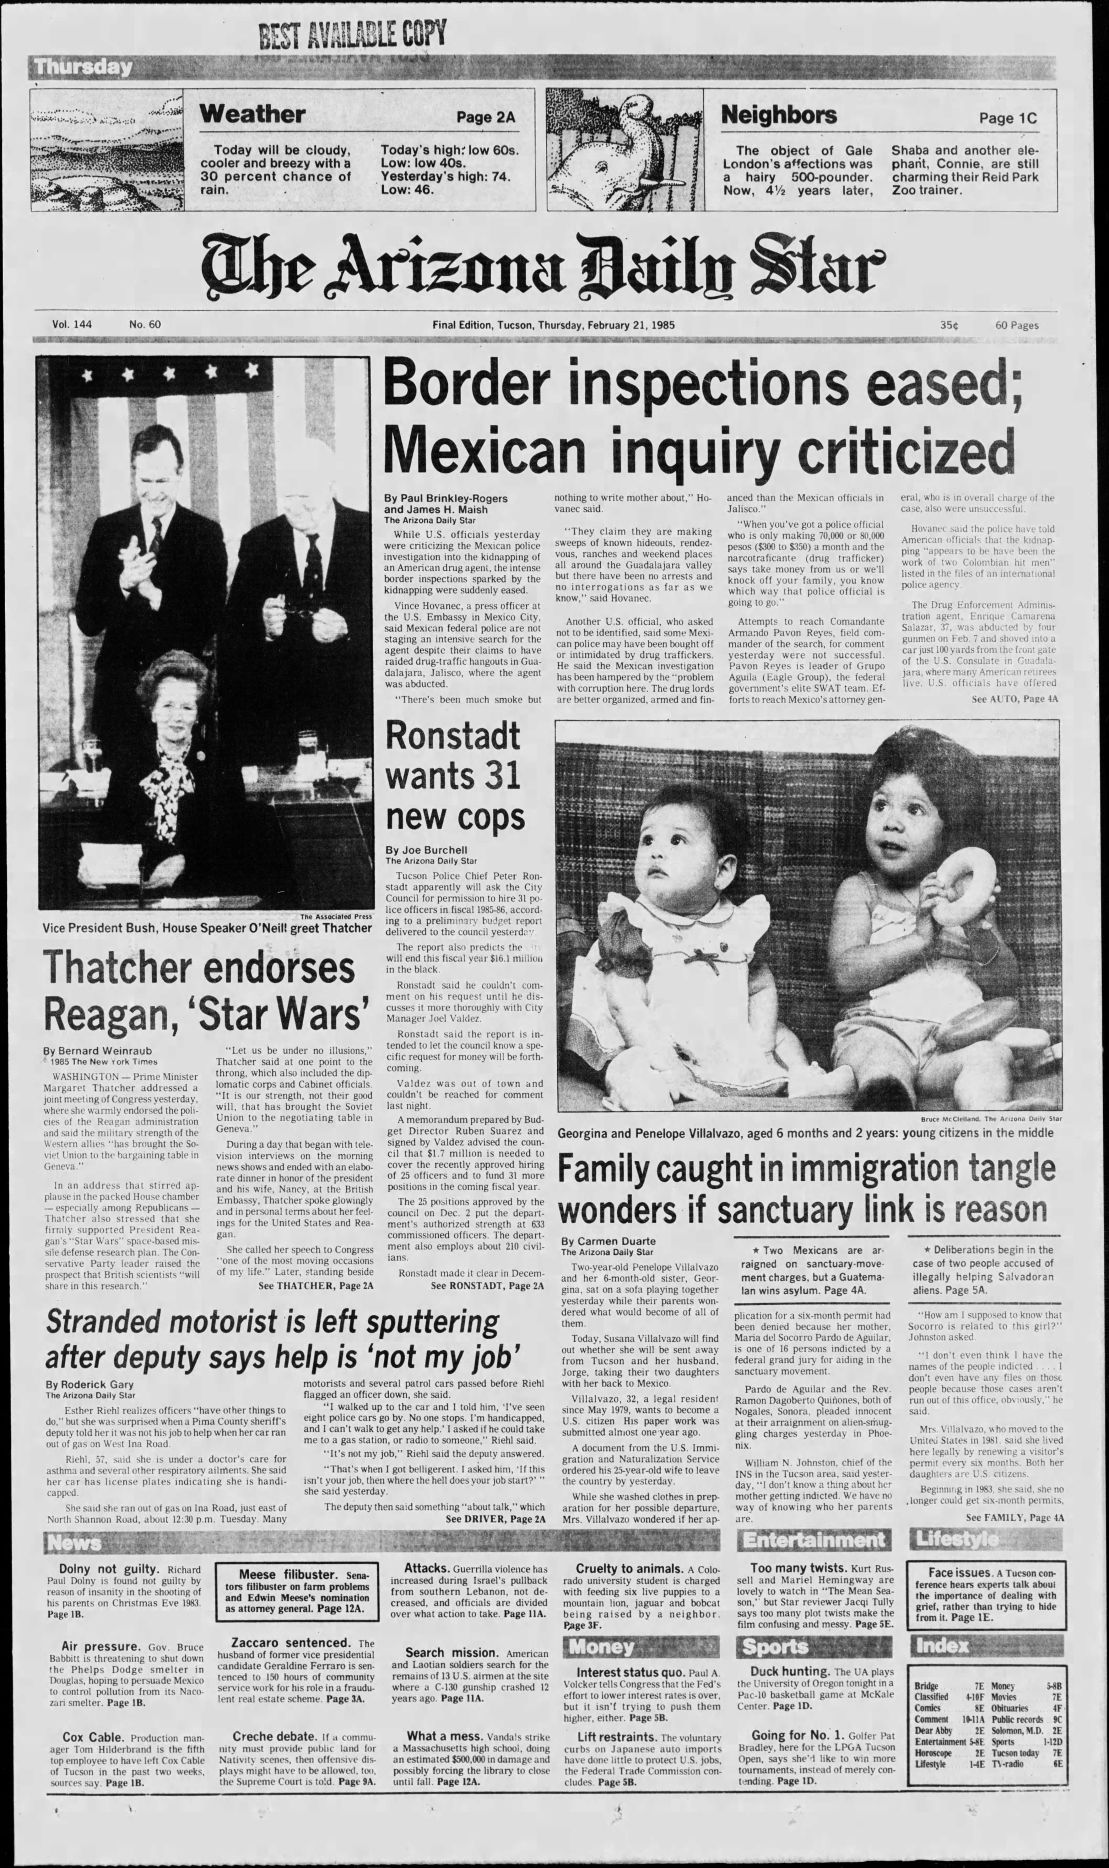 Historical Feb. 21 Arizona Daily Star front pages Tucson history and